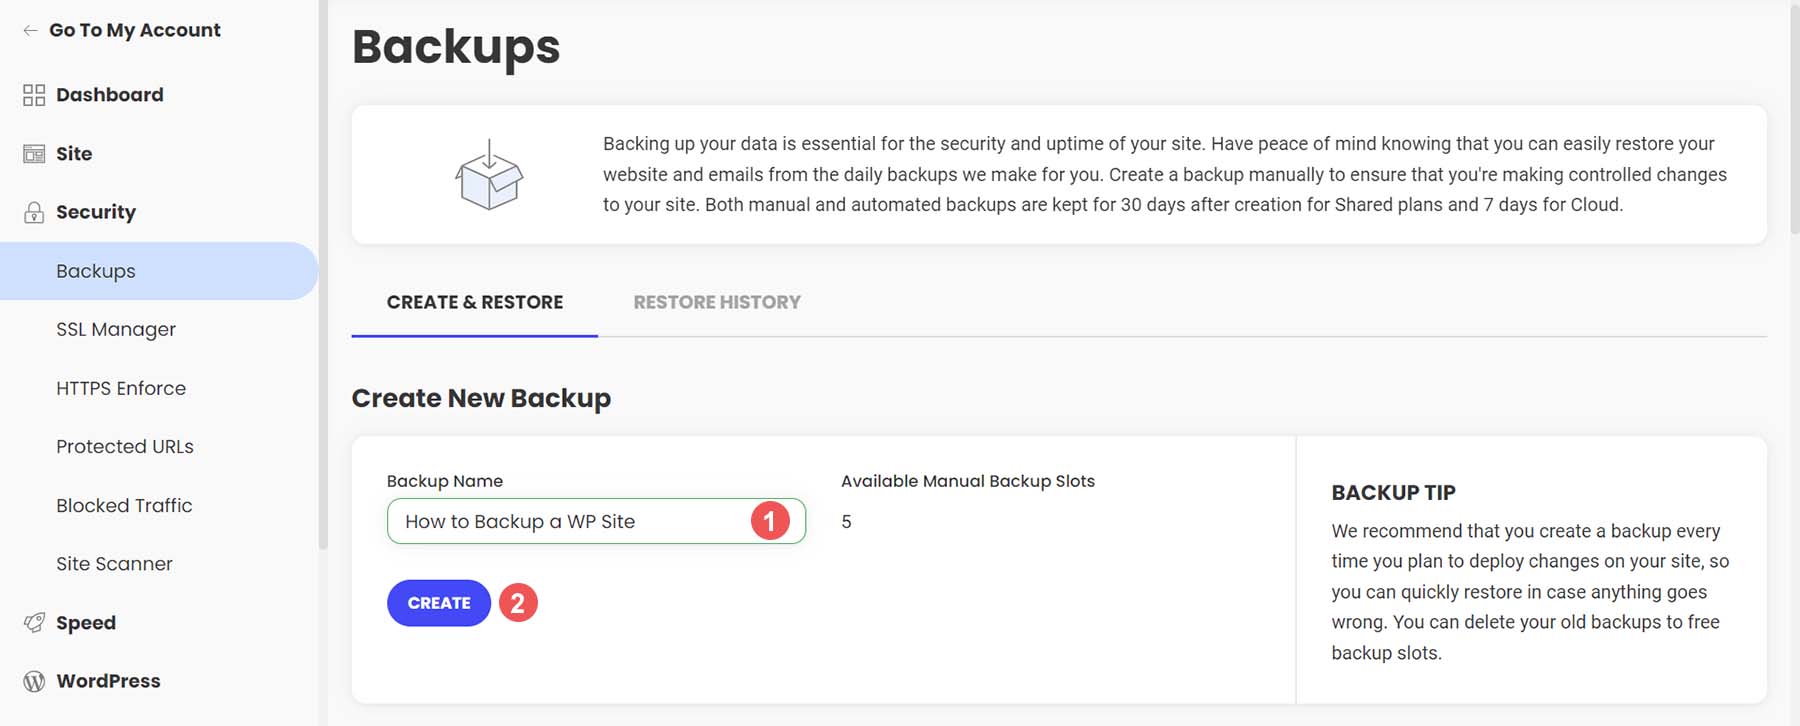 Name and start your web hosting backup process